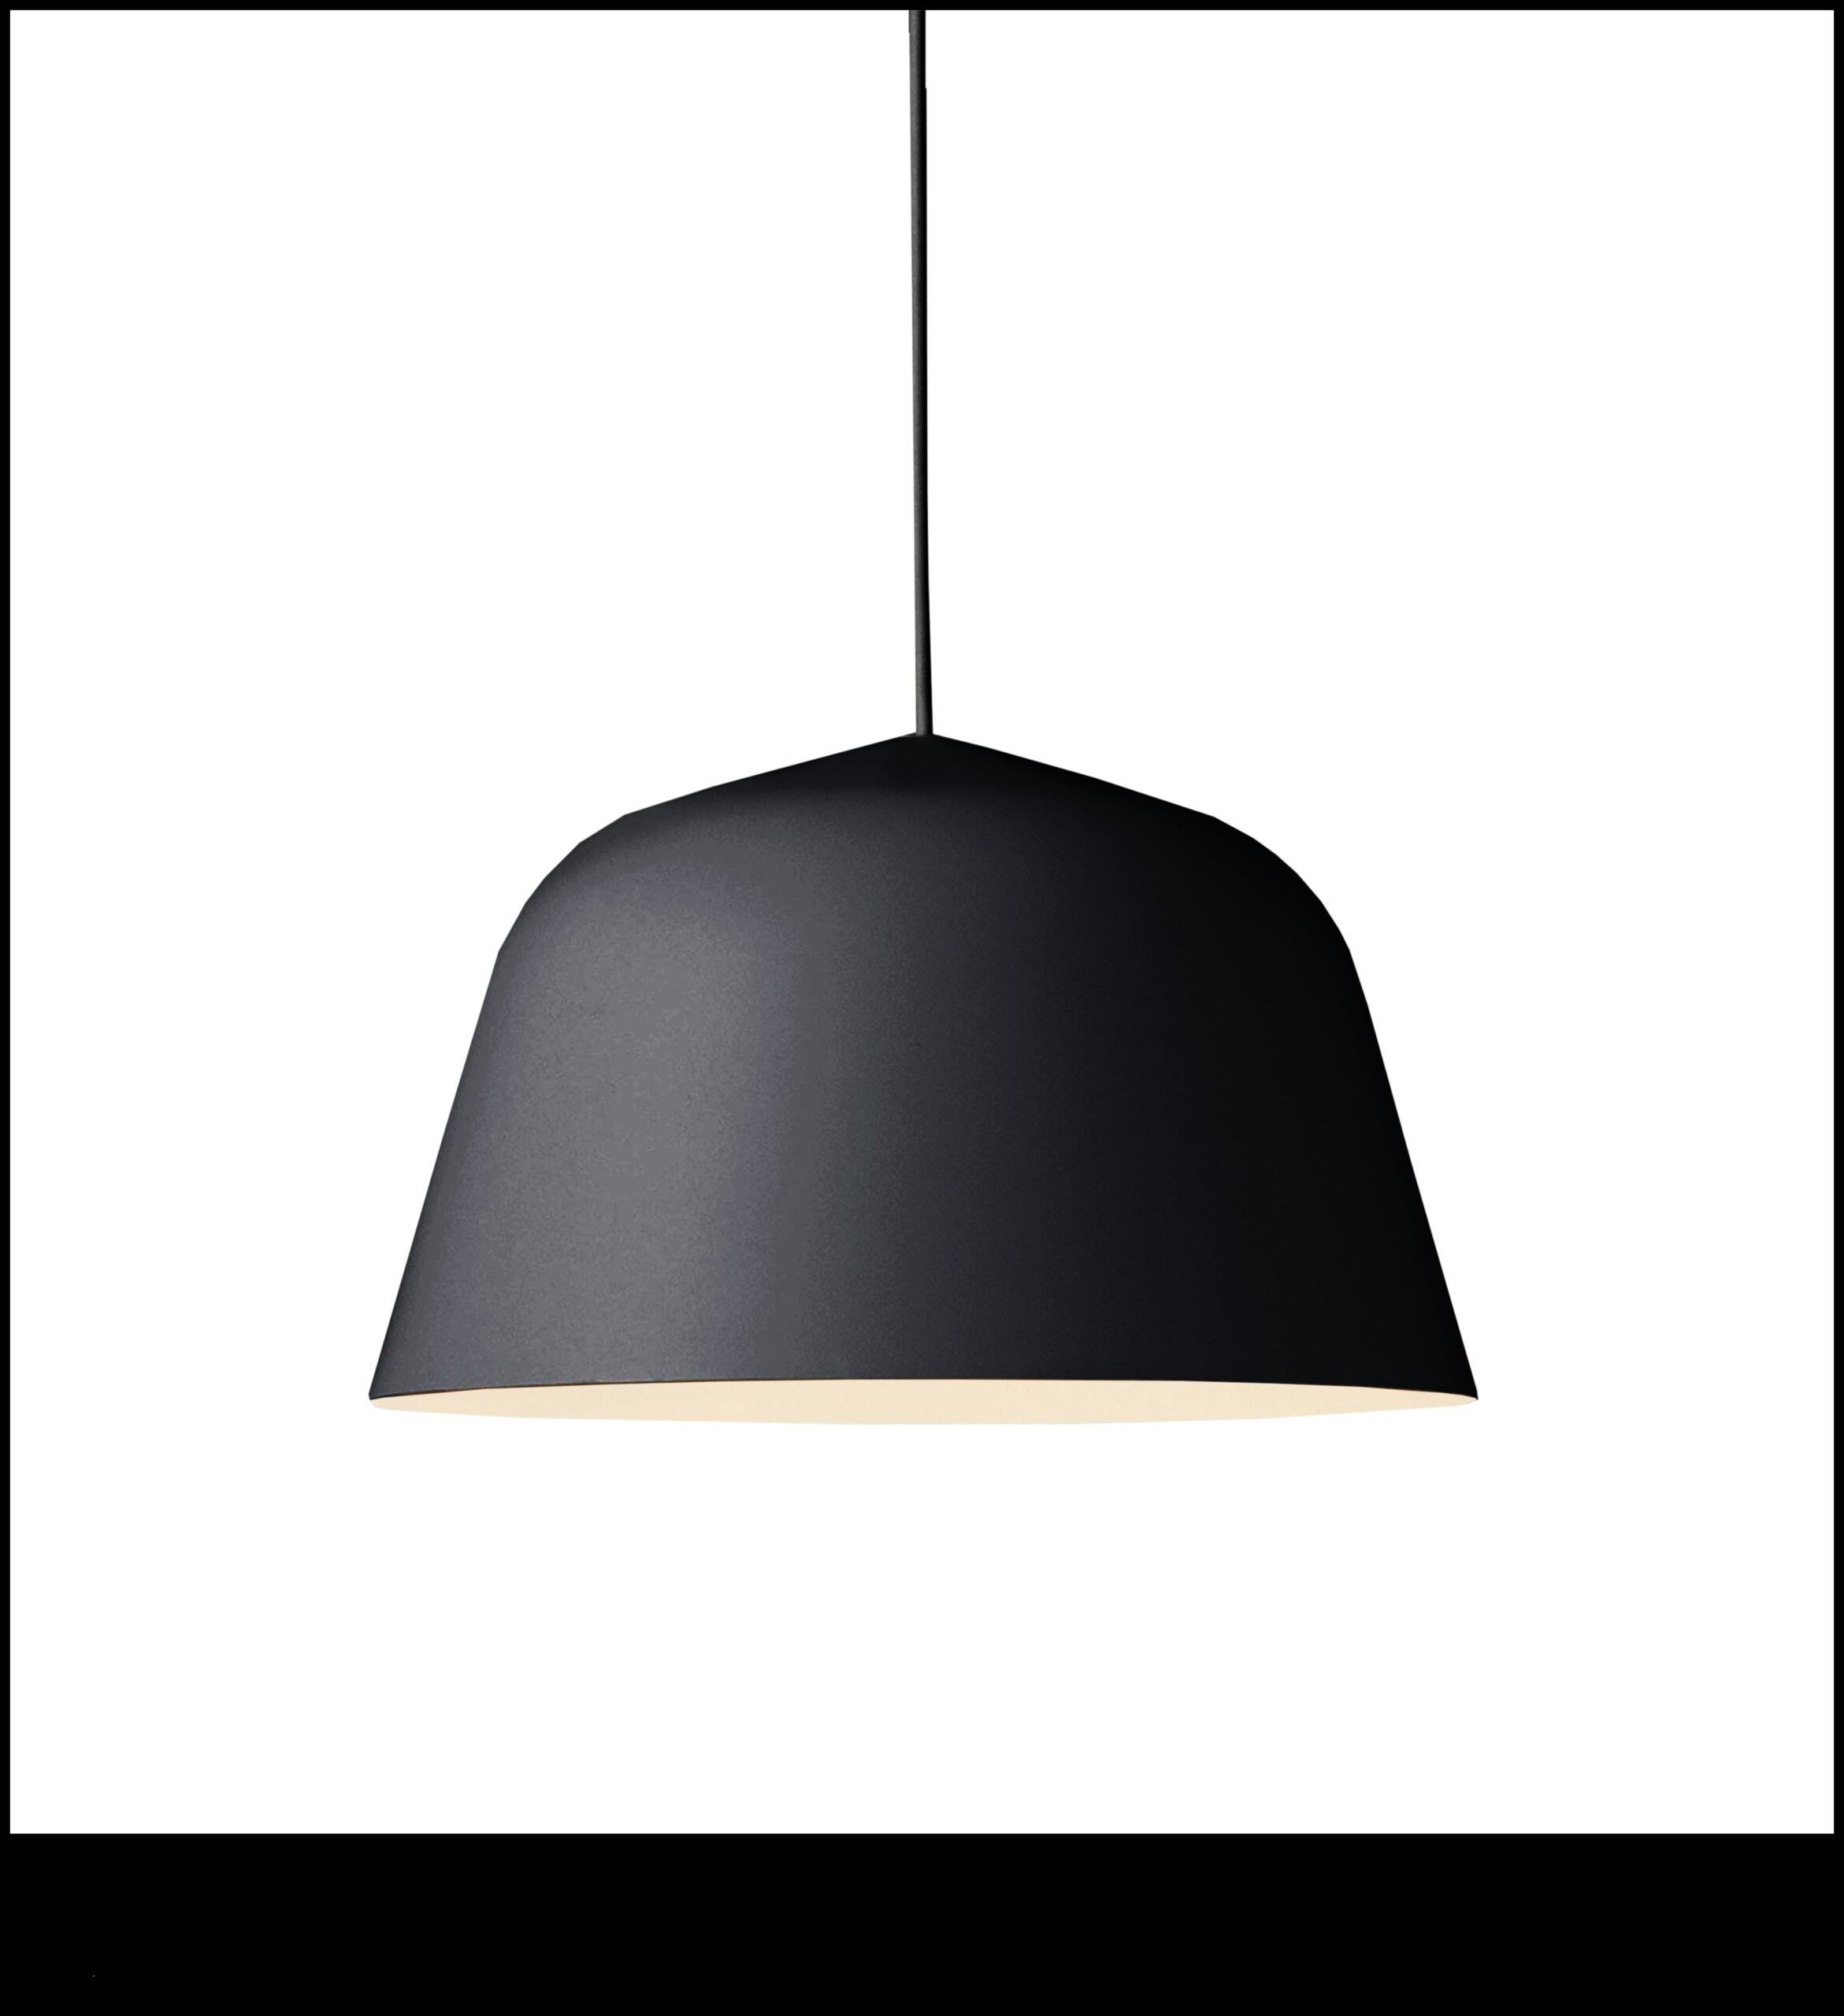 Elevated Ambiance: Black Pendant Lamps for Elegant Homes